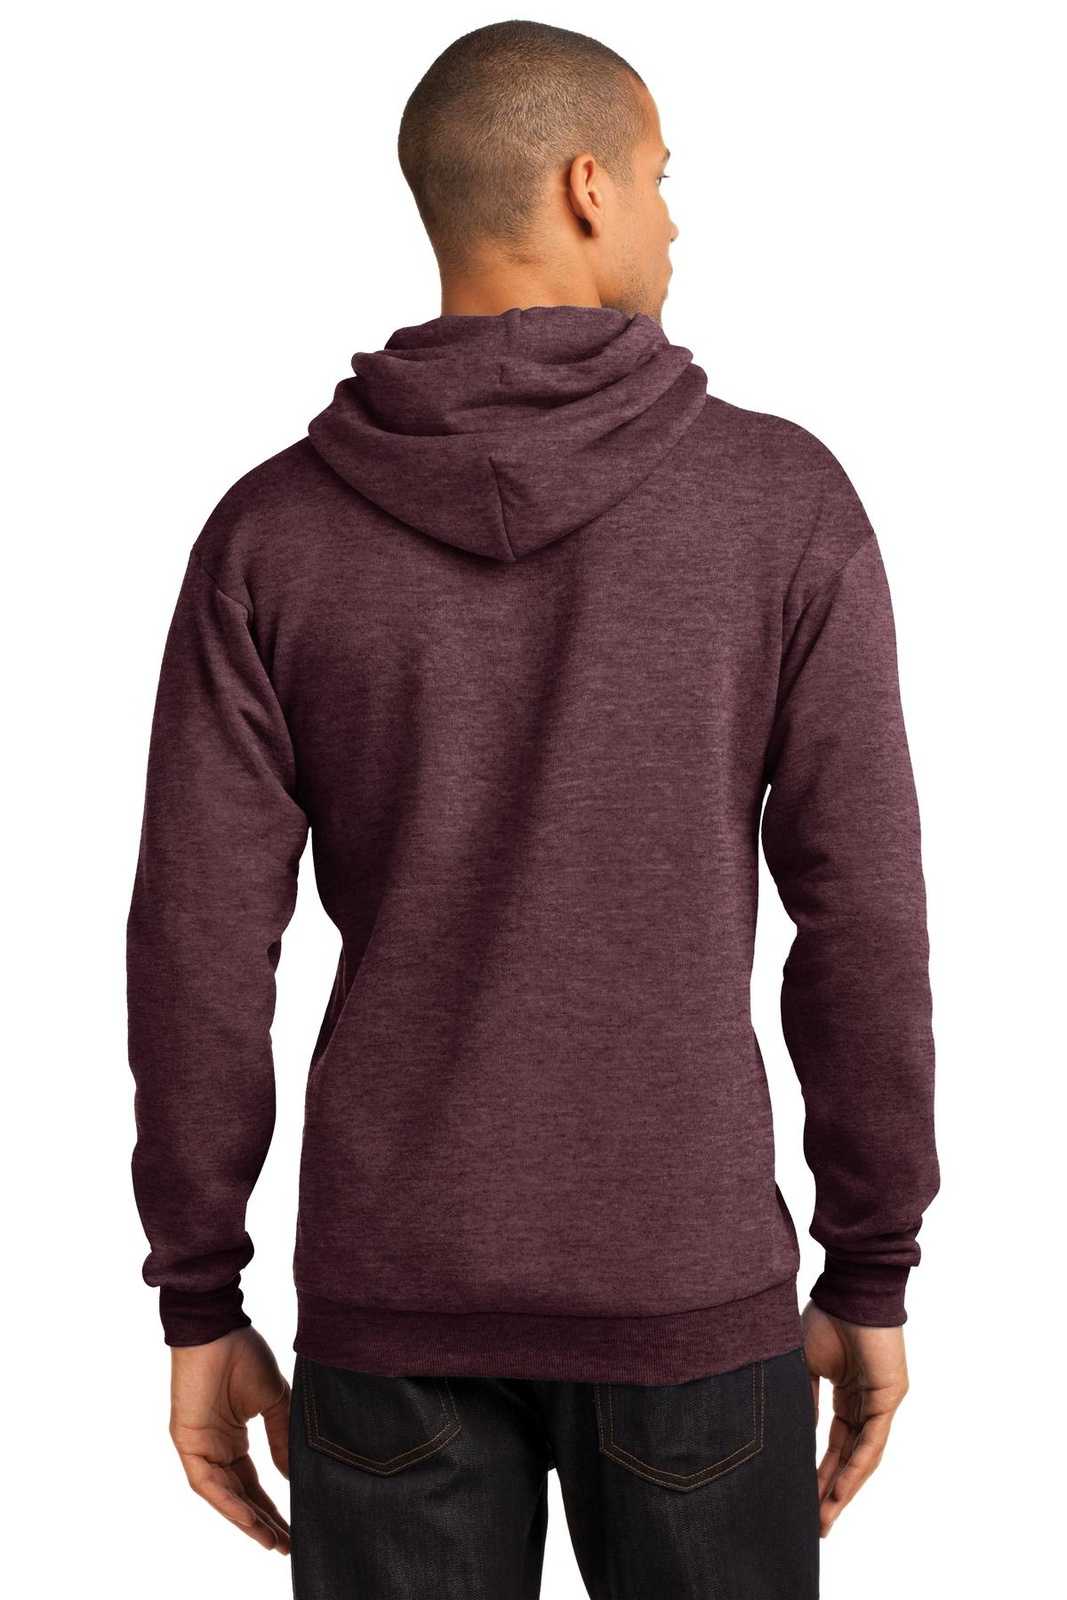 Port & Company PC78H Core Fleece Pullover Hooded Sweatshirt - Heather Athletic Maroon - HIT a Double - 1